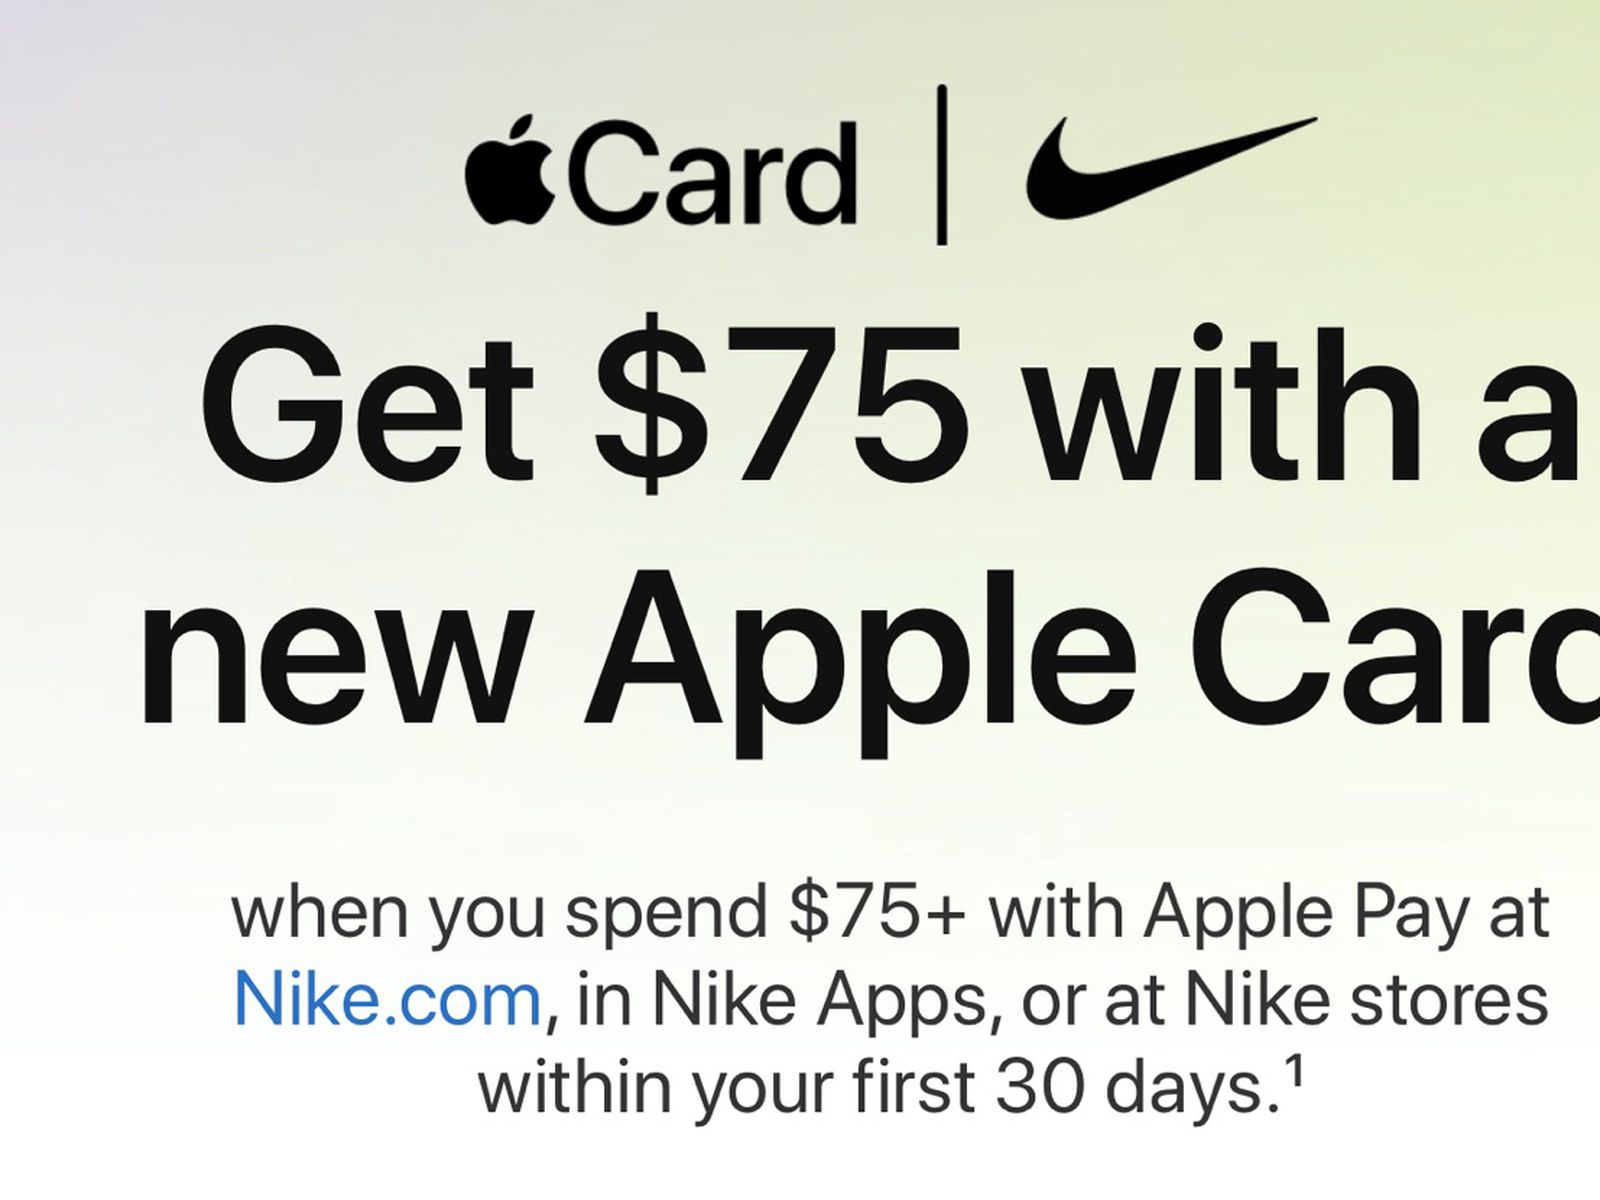 New Apple Users Get $75 Cash Back Spending $75+ at Nike Stores [Updated] - MacRumors